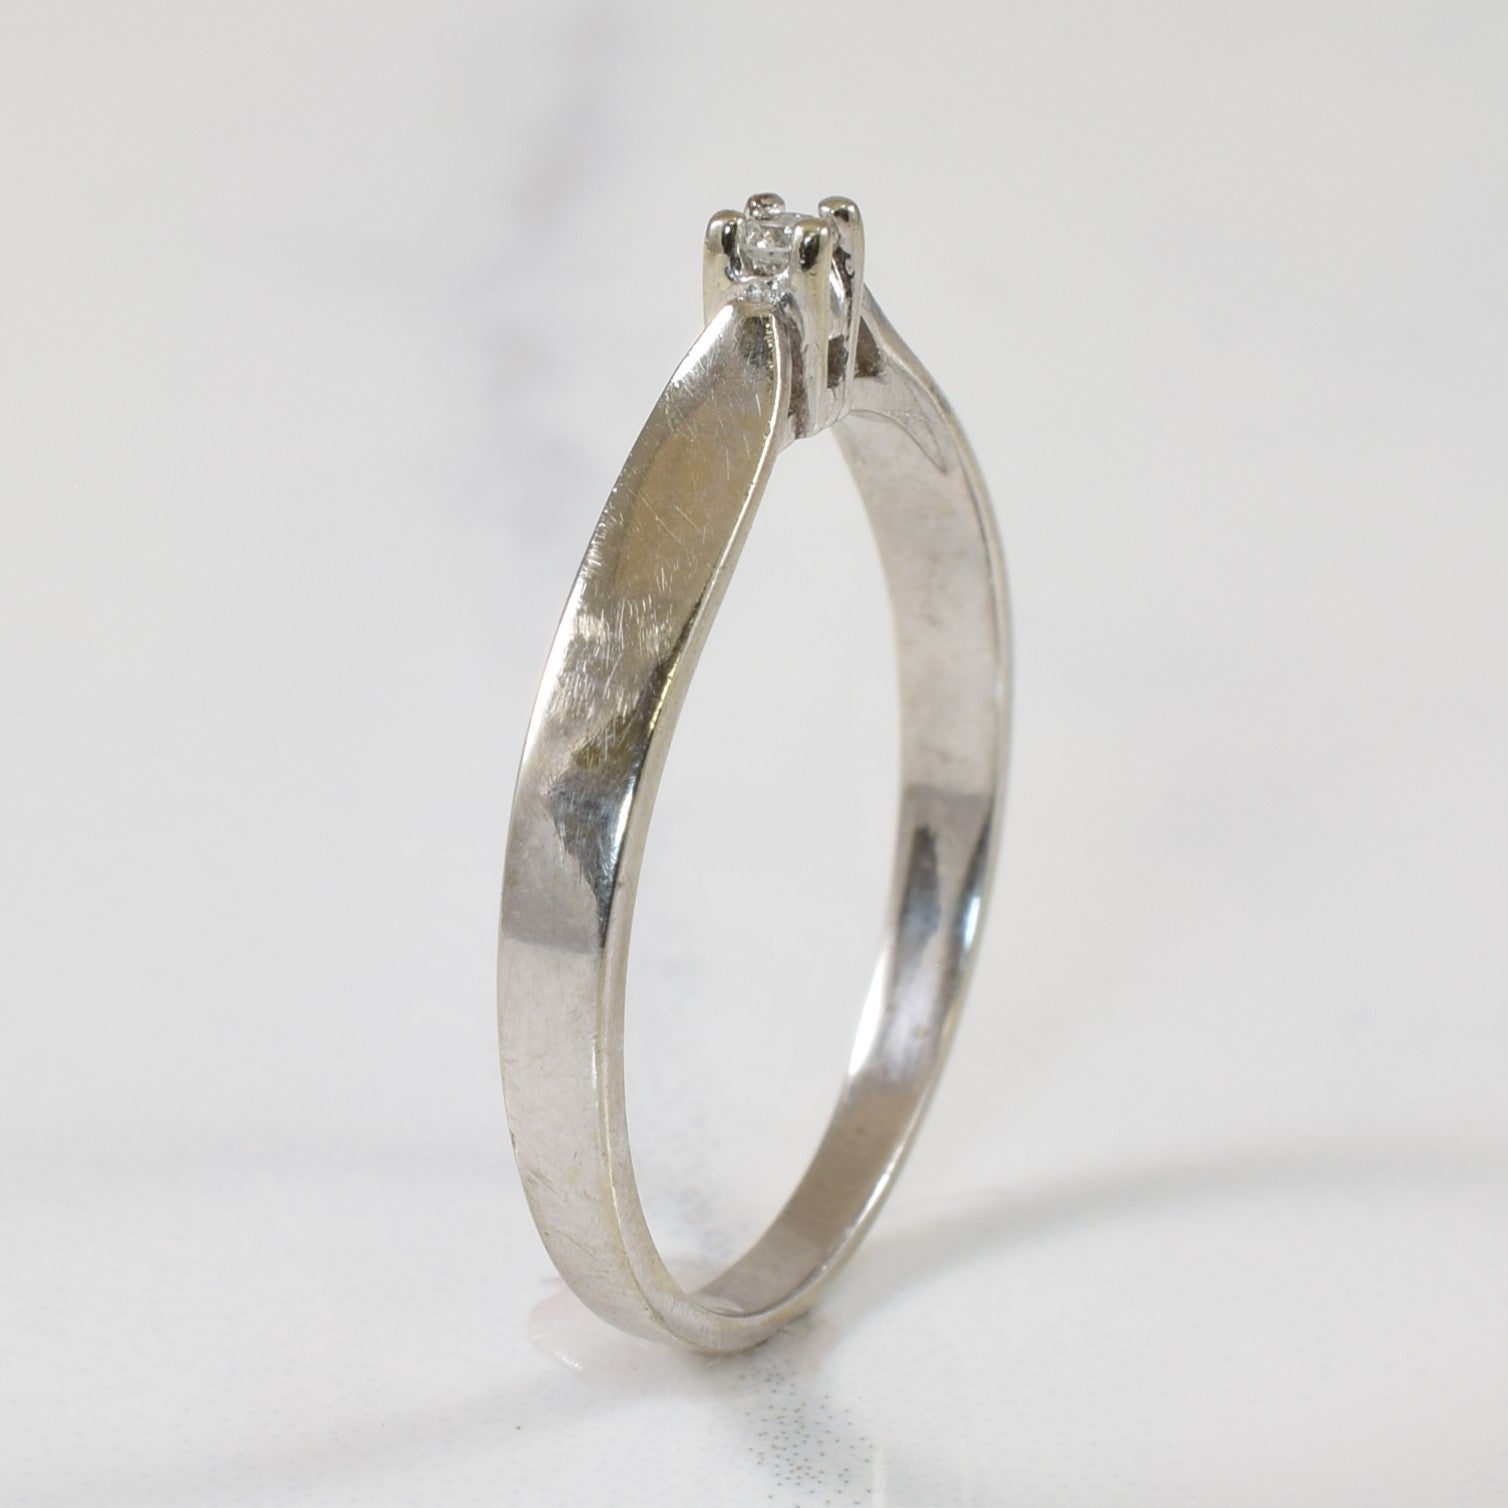 Diamond Cathedral Ring | 0.03ct | SZ 7.25 |